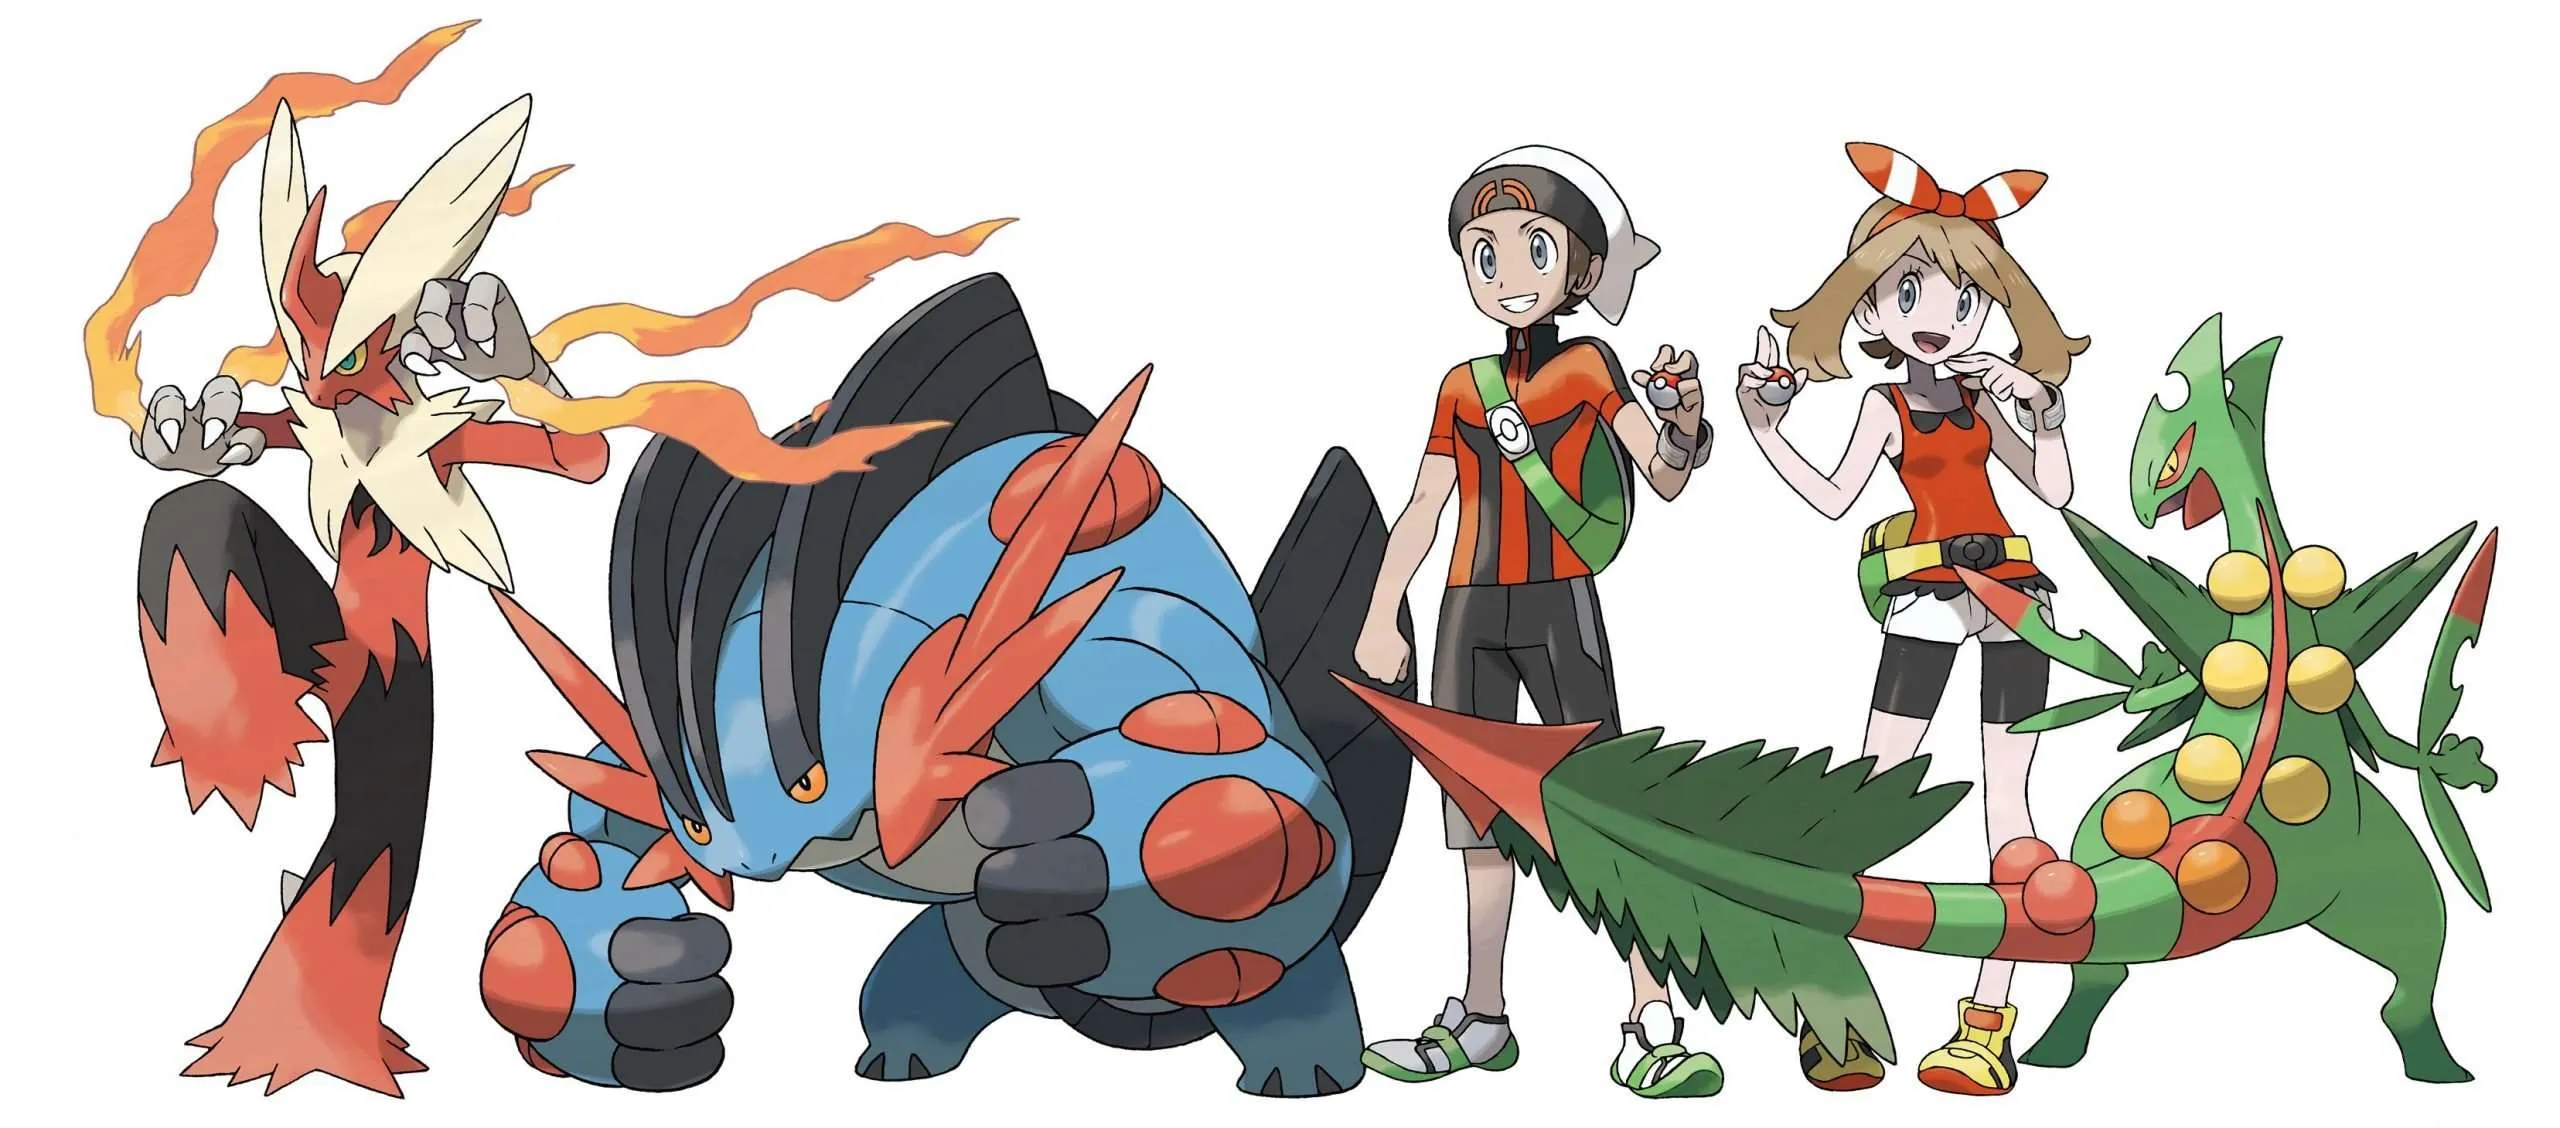 Pokemon Starters and Trainers